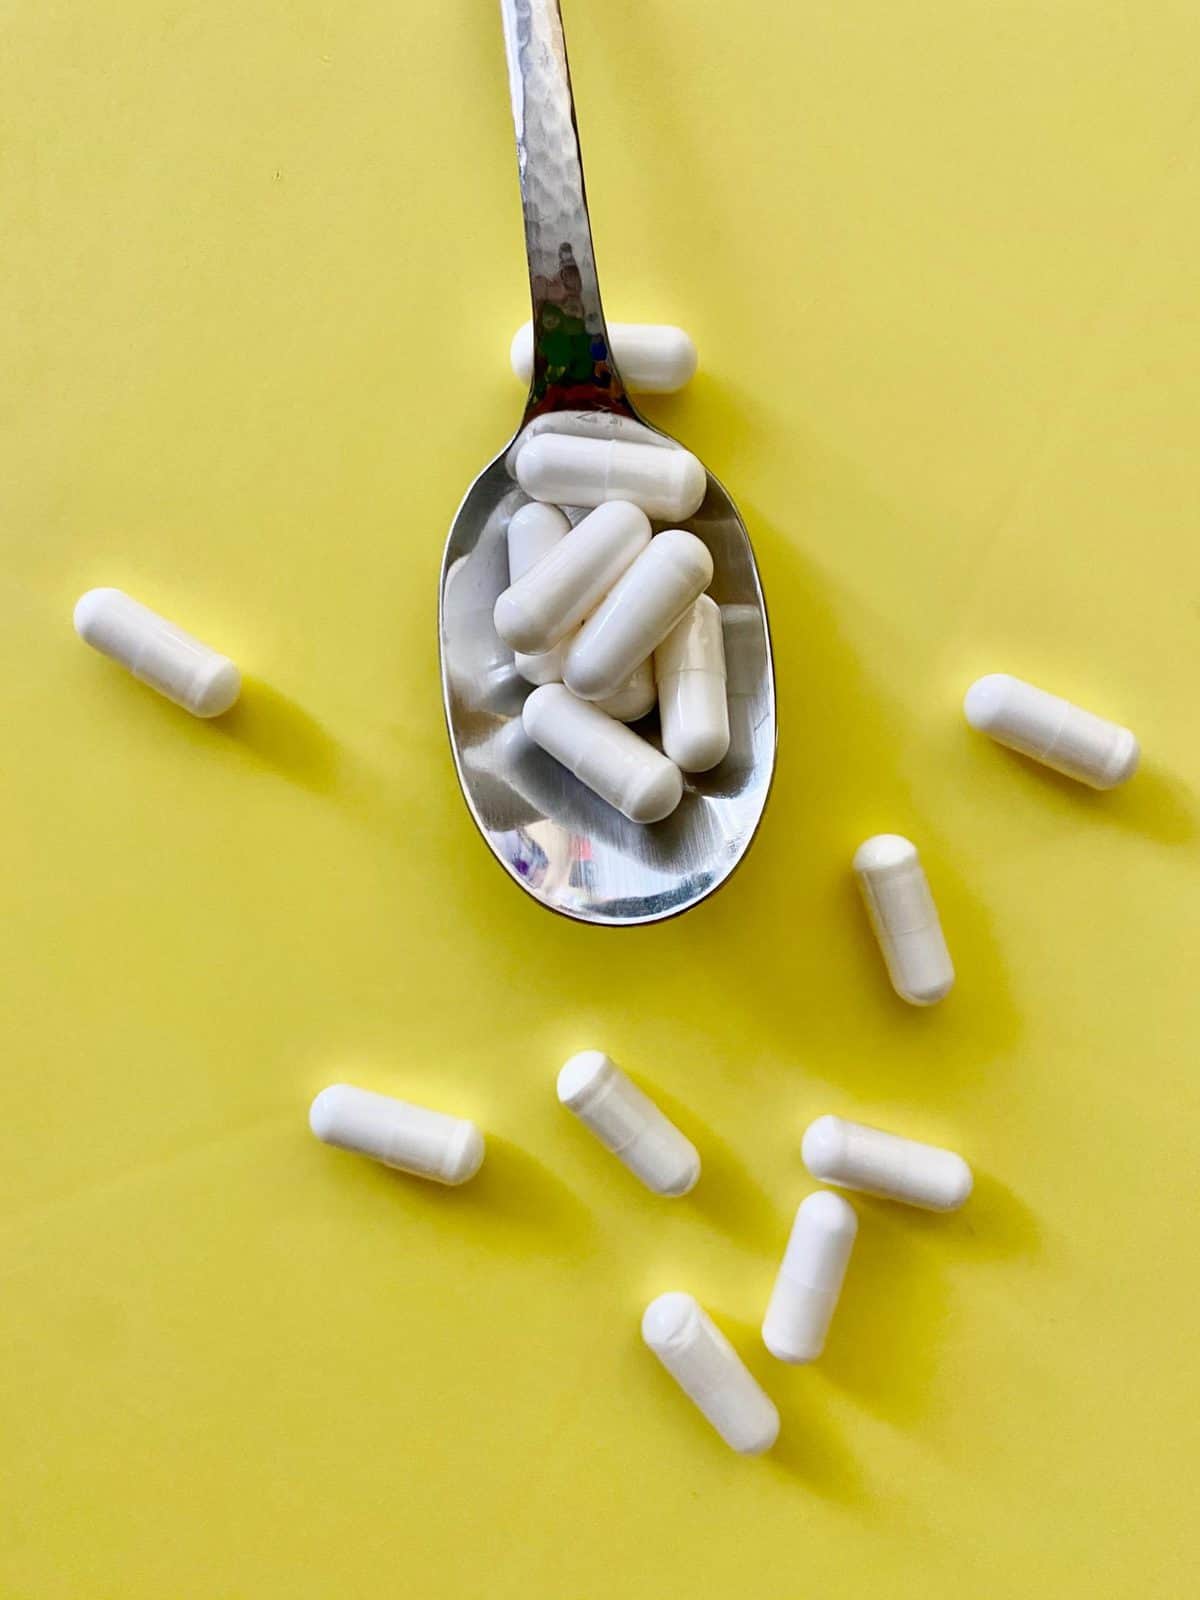 several probiotic capsules on a spoon 